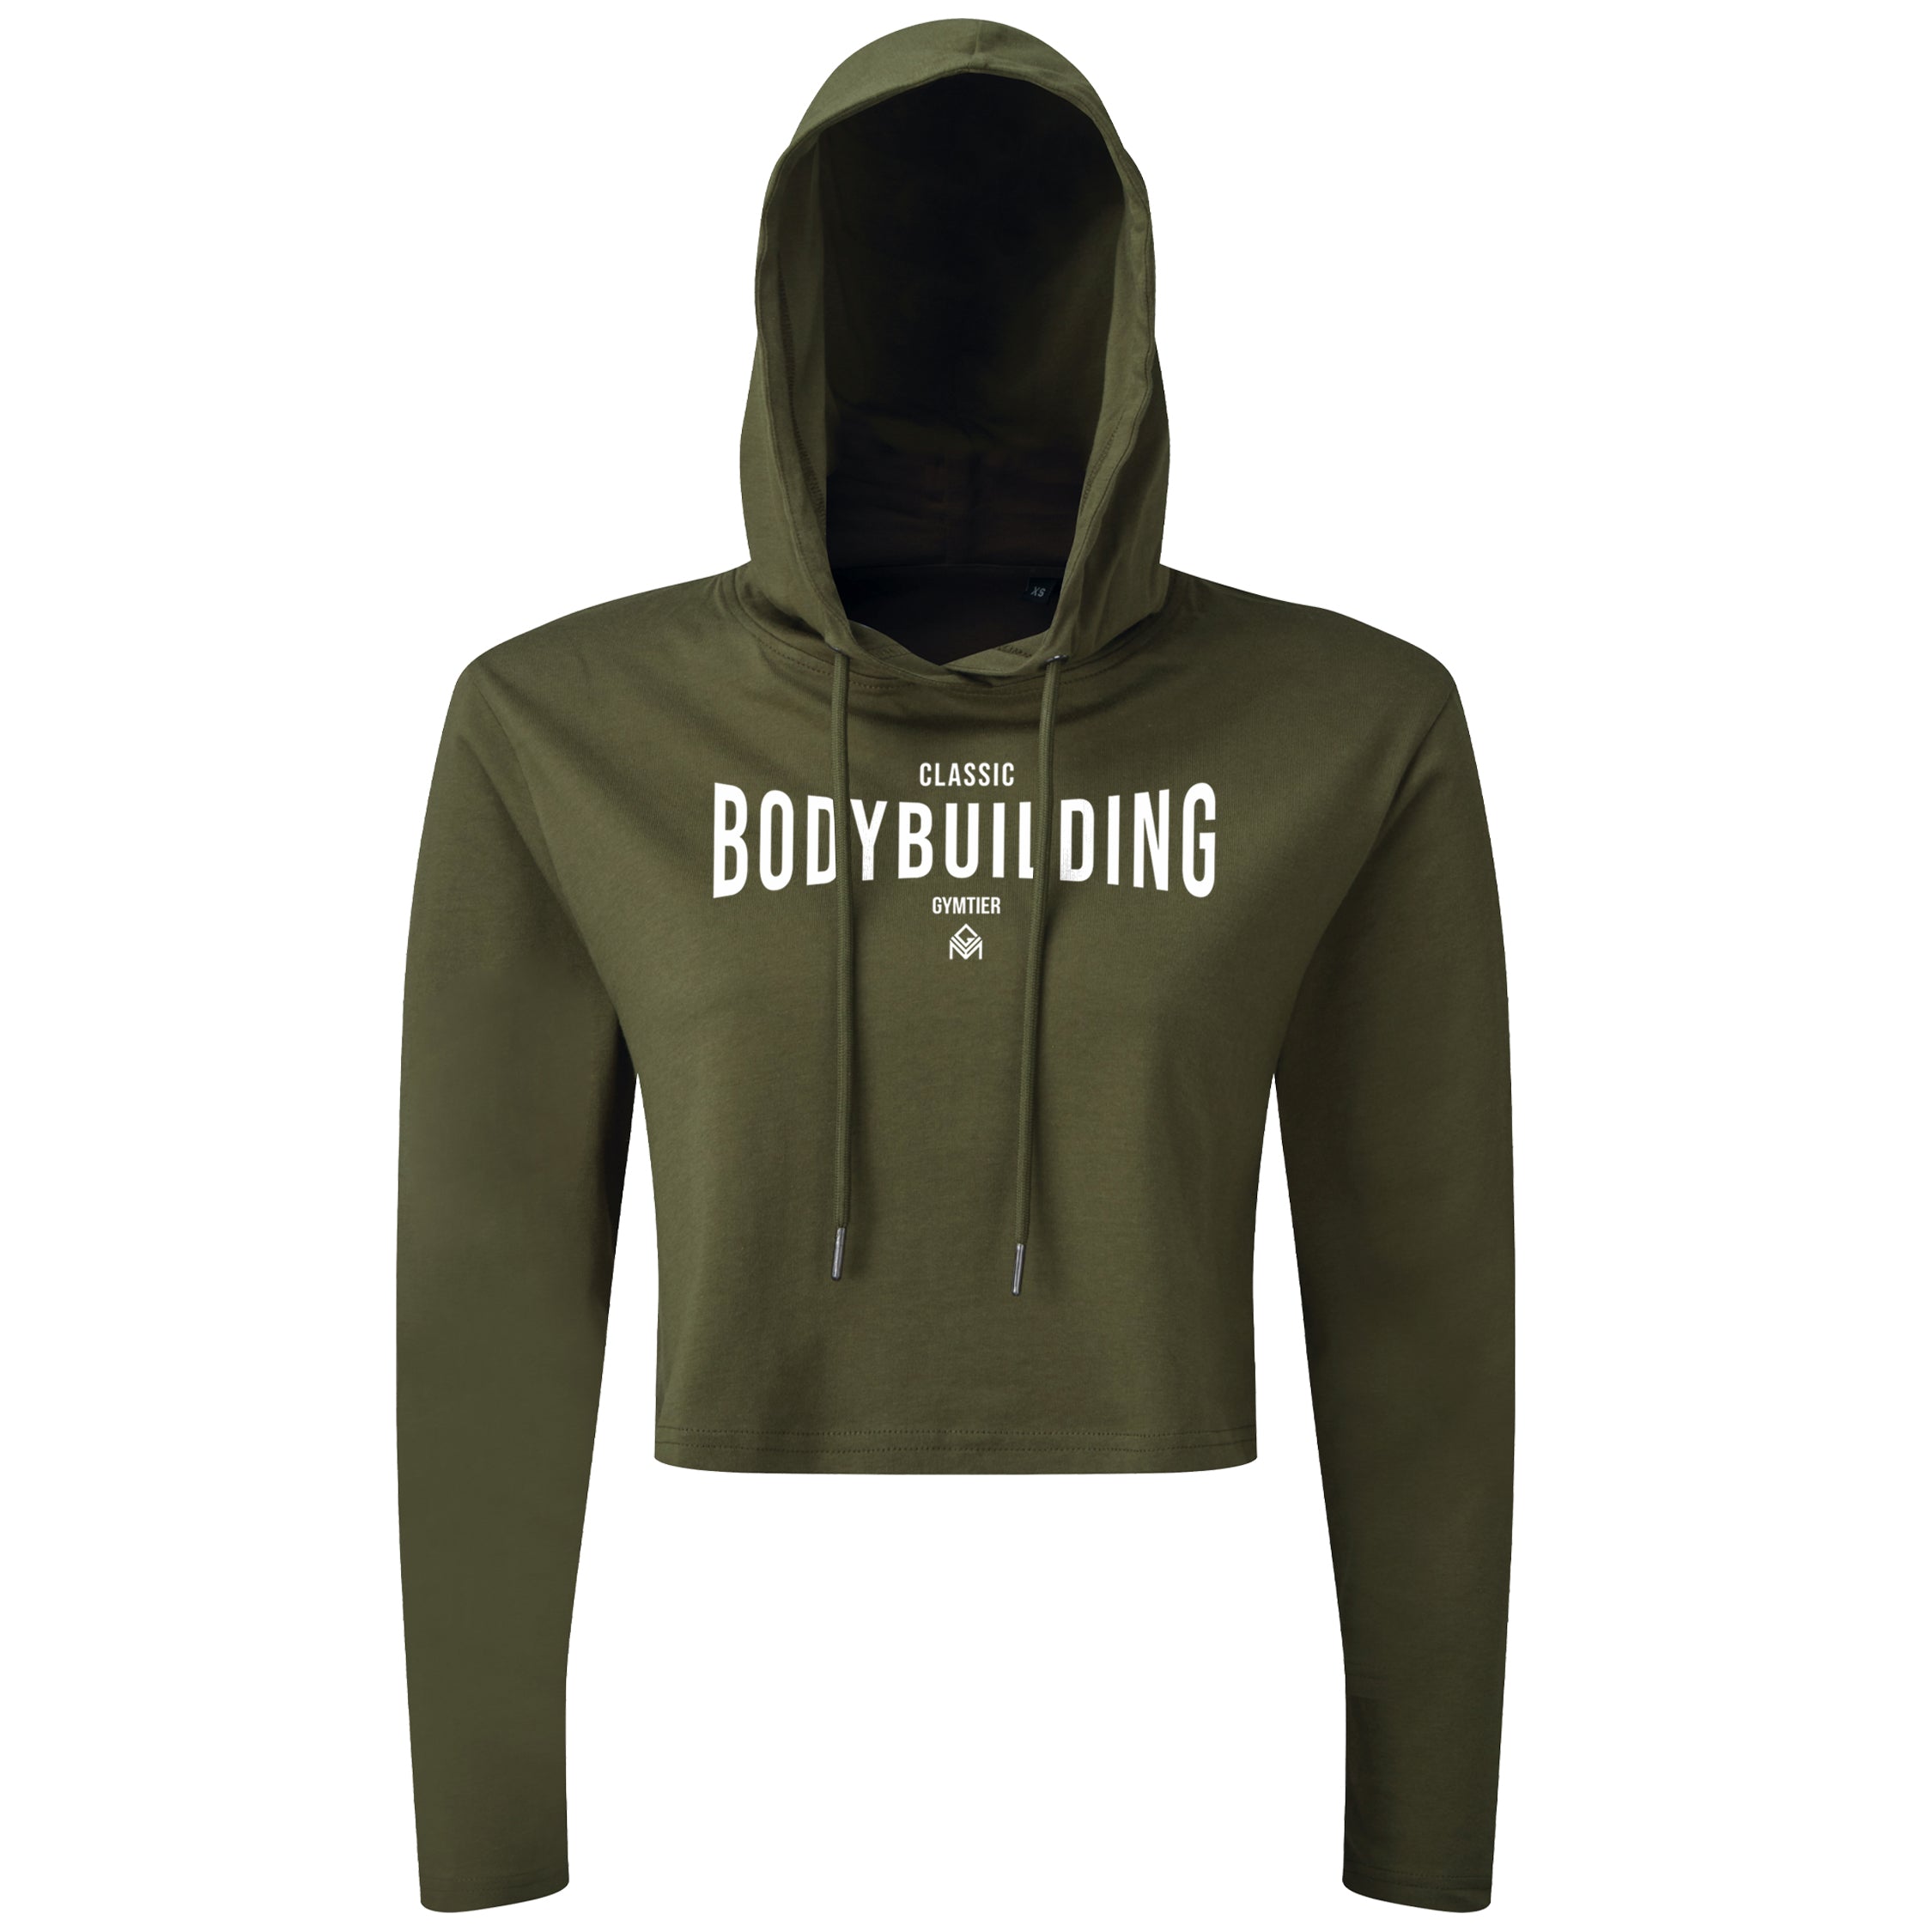 Classic Bodybuilding - Cropped Hoodie